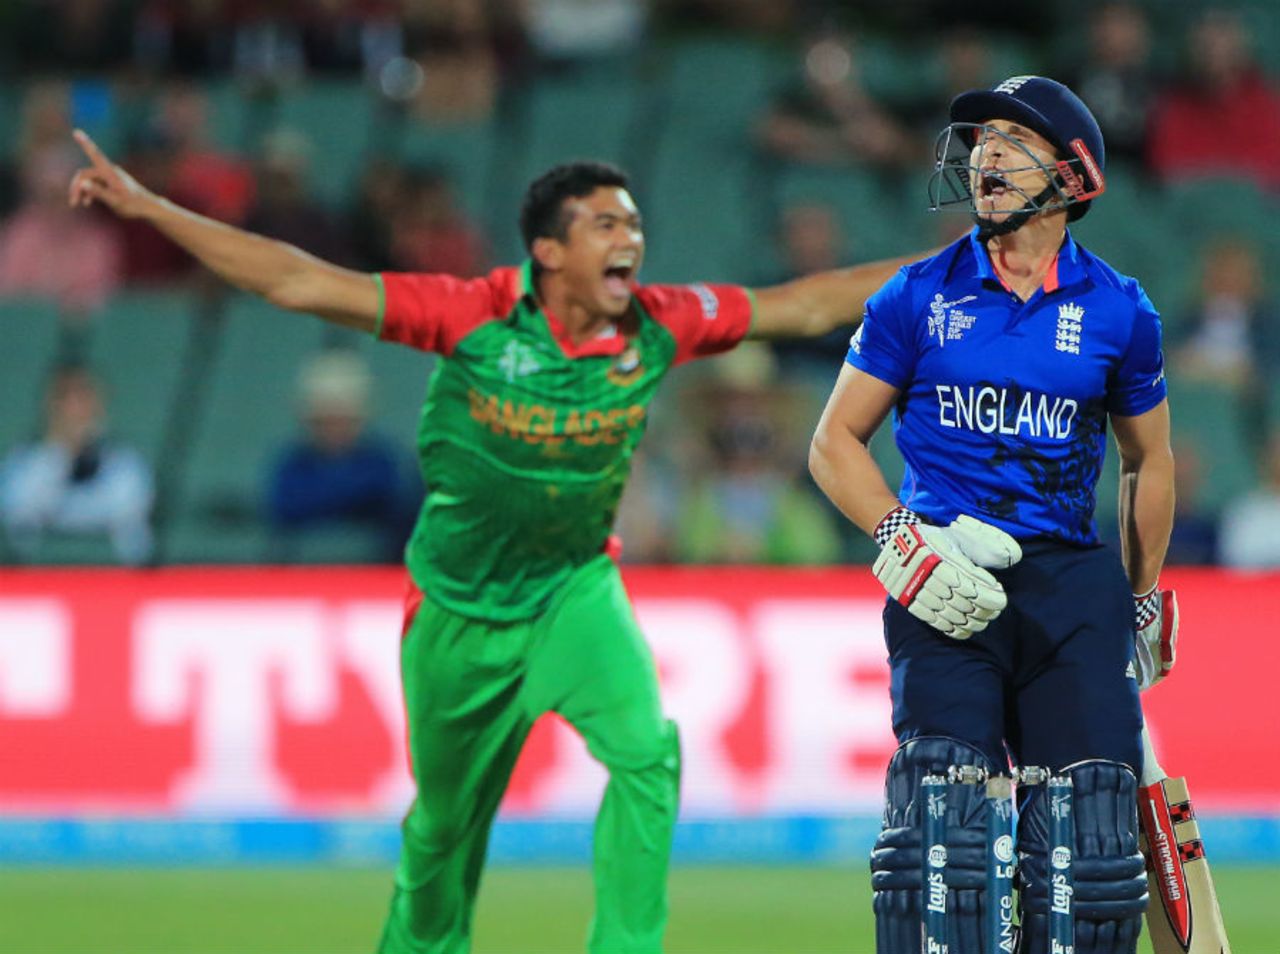 James Taylor reacts after getting out, England v Bangladesh, World Cup 2015, Group A, Adelaide, March 9, 2015